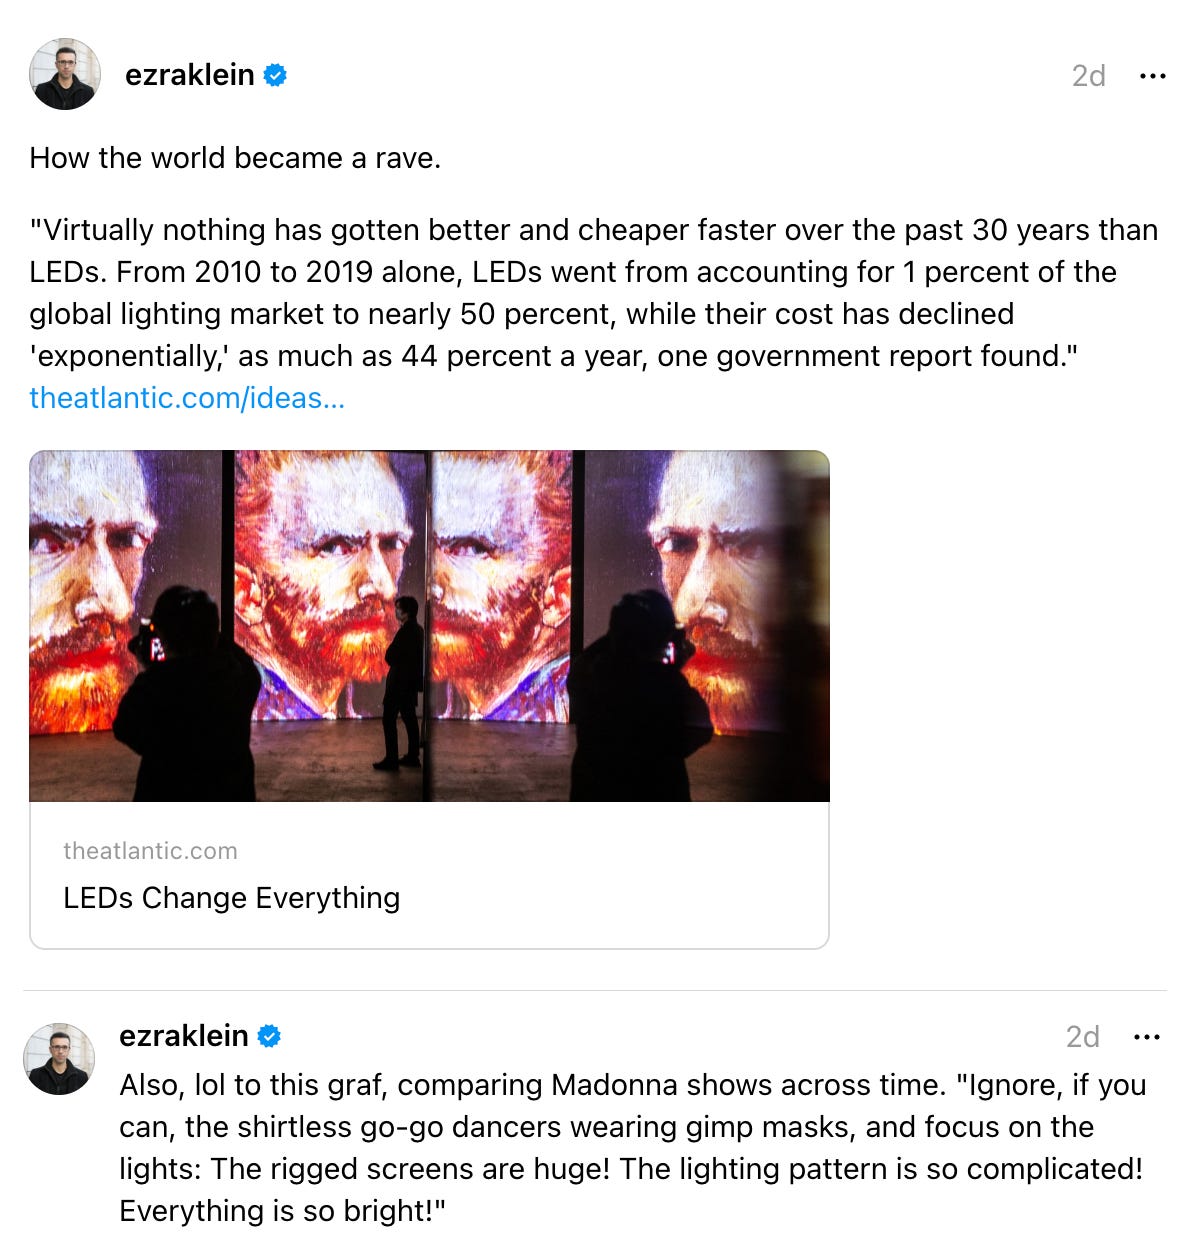 ezraklein 2d How the world became a rave. "Virtually nothing has gotten better and cheaper faster over the past 30 years than LEDs. From 2010 to 2019 alone, LEDs went from accounting for 1 percent of the global lighting market to nearly 50 percent, while their cost has declined 'exponentially,' as much as 44 percent a year, one government report found." theatlantic.com/ideas… LEDs Change Everything theatlantic.com LEDs Change Everything 10  replies  ·  ezraklein 2d Also, lol to this graf, comparing Madonna shows across time. "Ignore, if you can, the shirtless go-go dancers wearing gimp masks, and focus on the lights: The rigged screens are huge! The lighting pattern is so complicated! Everything is so bright!"